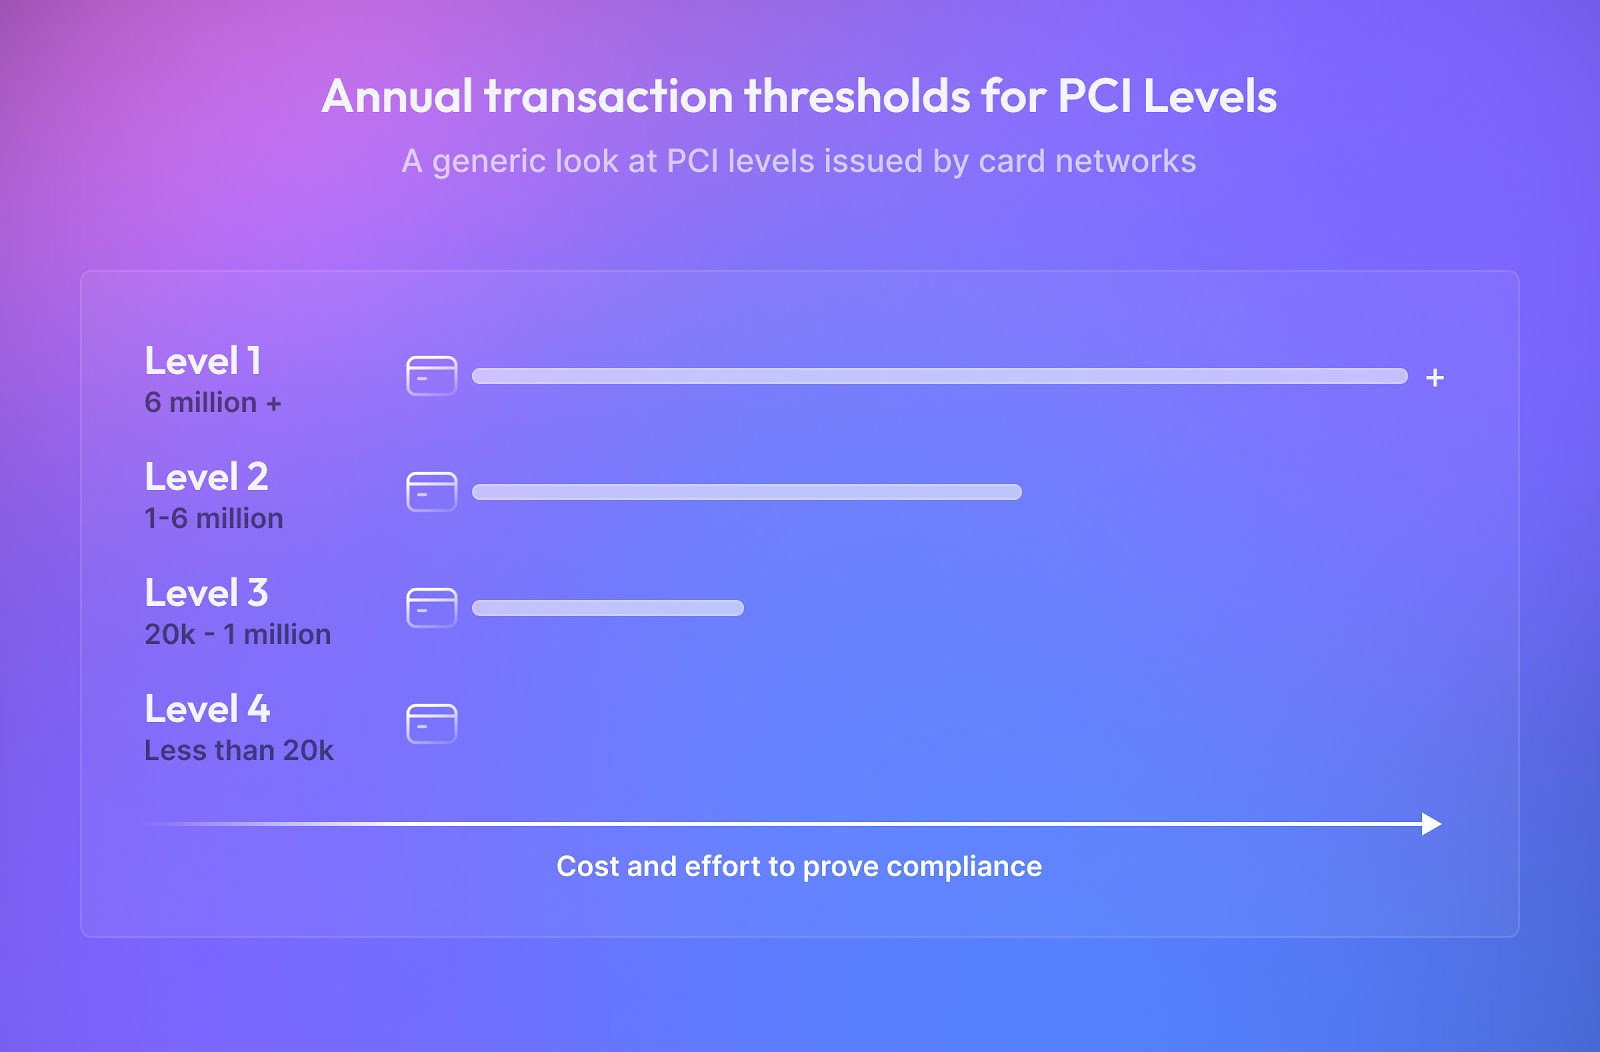 Compares the number of transactions of each PCI level to each other and how costs increase as you achieve Level 1 status